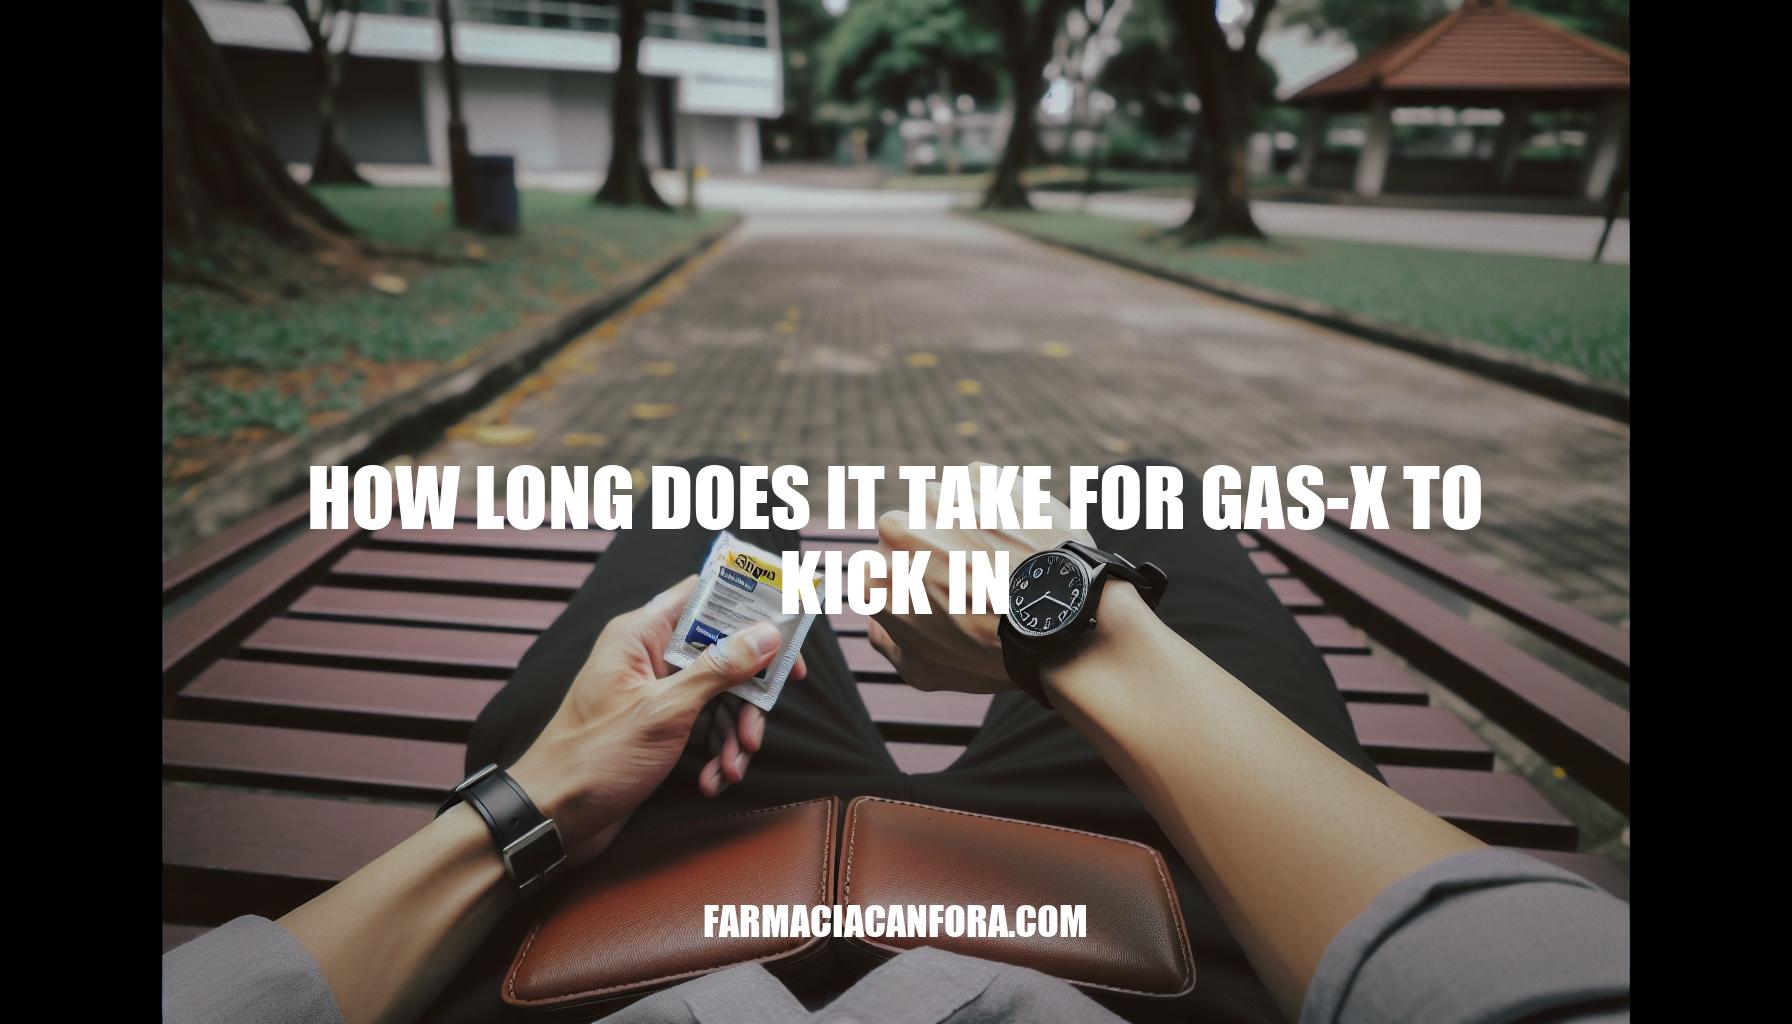 How Long Does It Take for Gas-X to Kick In